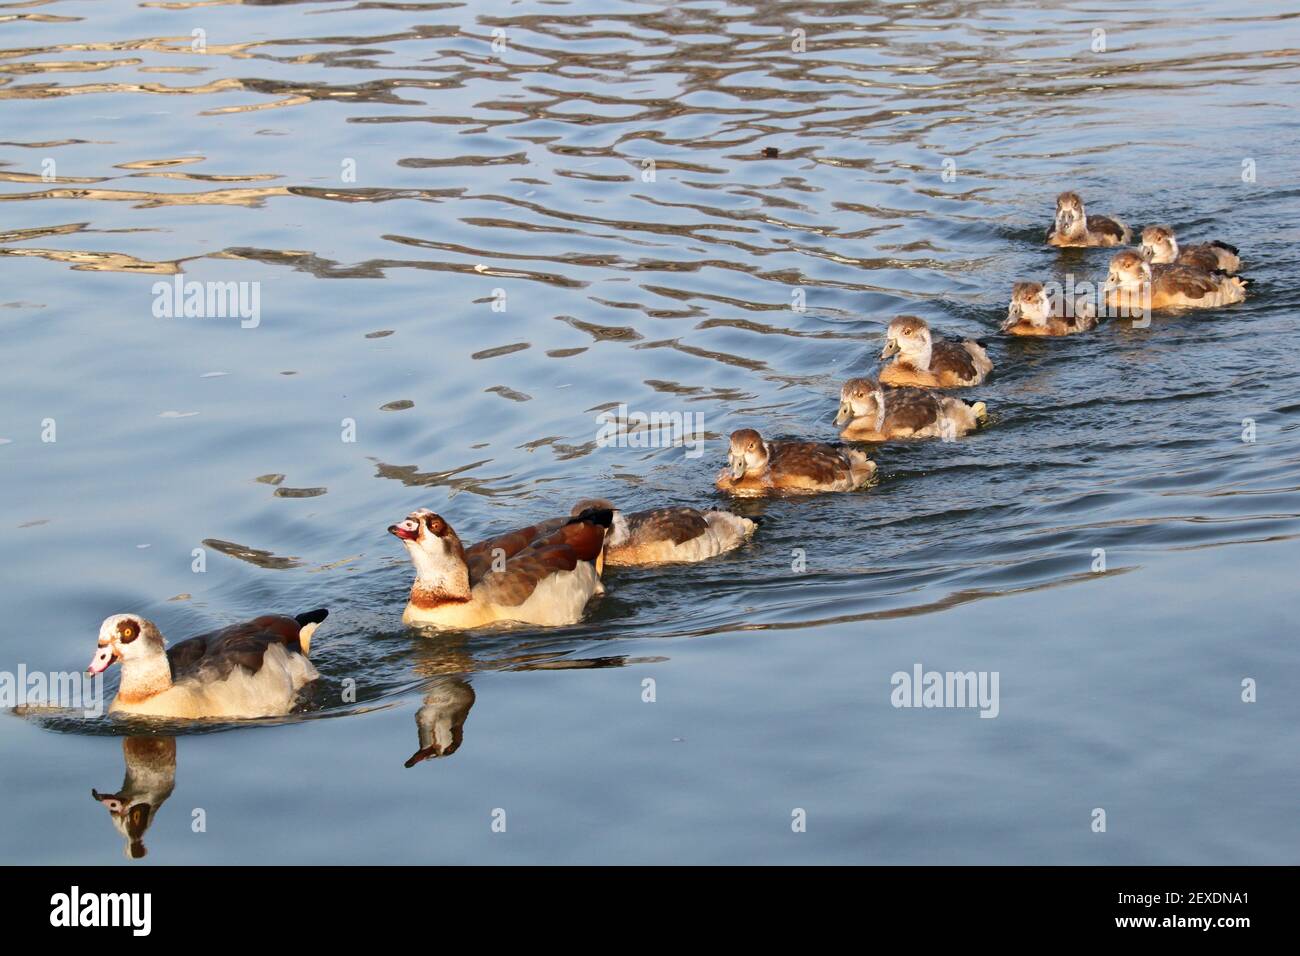 Pair of Egyptian Geese (Alopochen aegyptiacus) with eight goslings, Sadlers Ride, Hurst Park, East Molesey, Surrey, England, Great Britain, UK, Europe Stock Photo